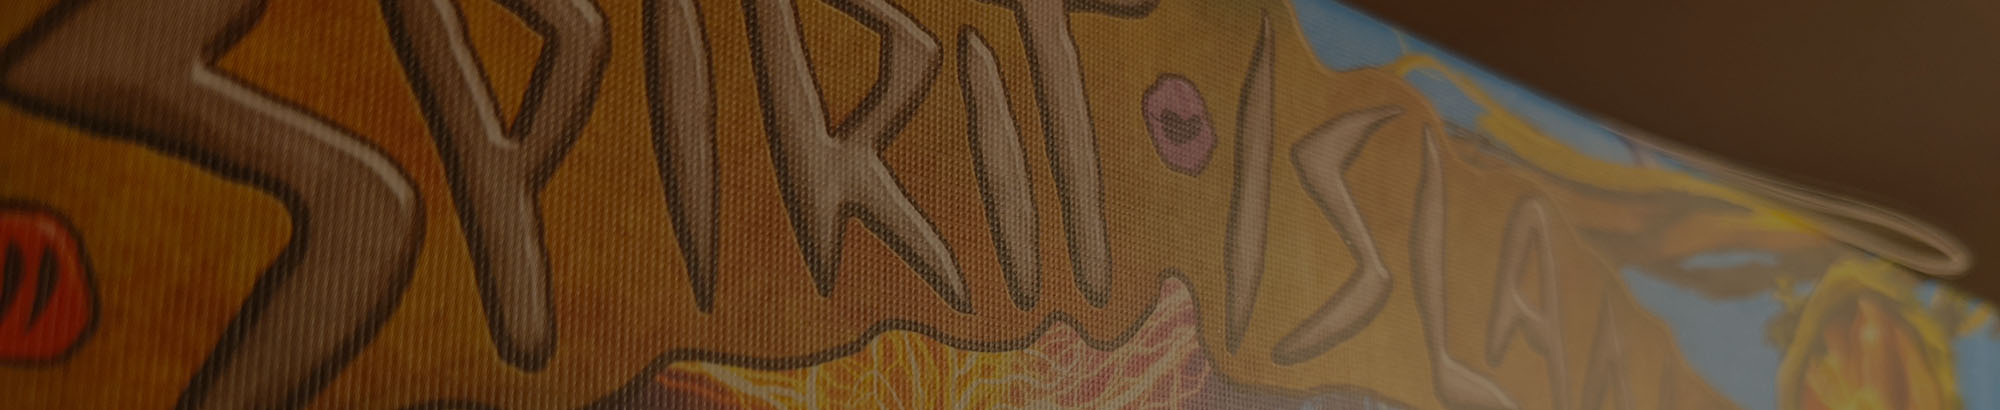 banner showing an up close view of the side of a board game box on a shelf